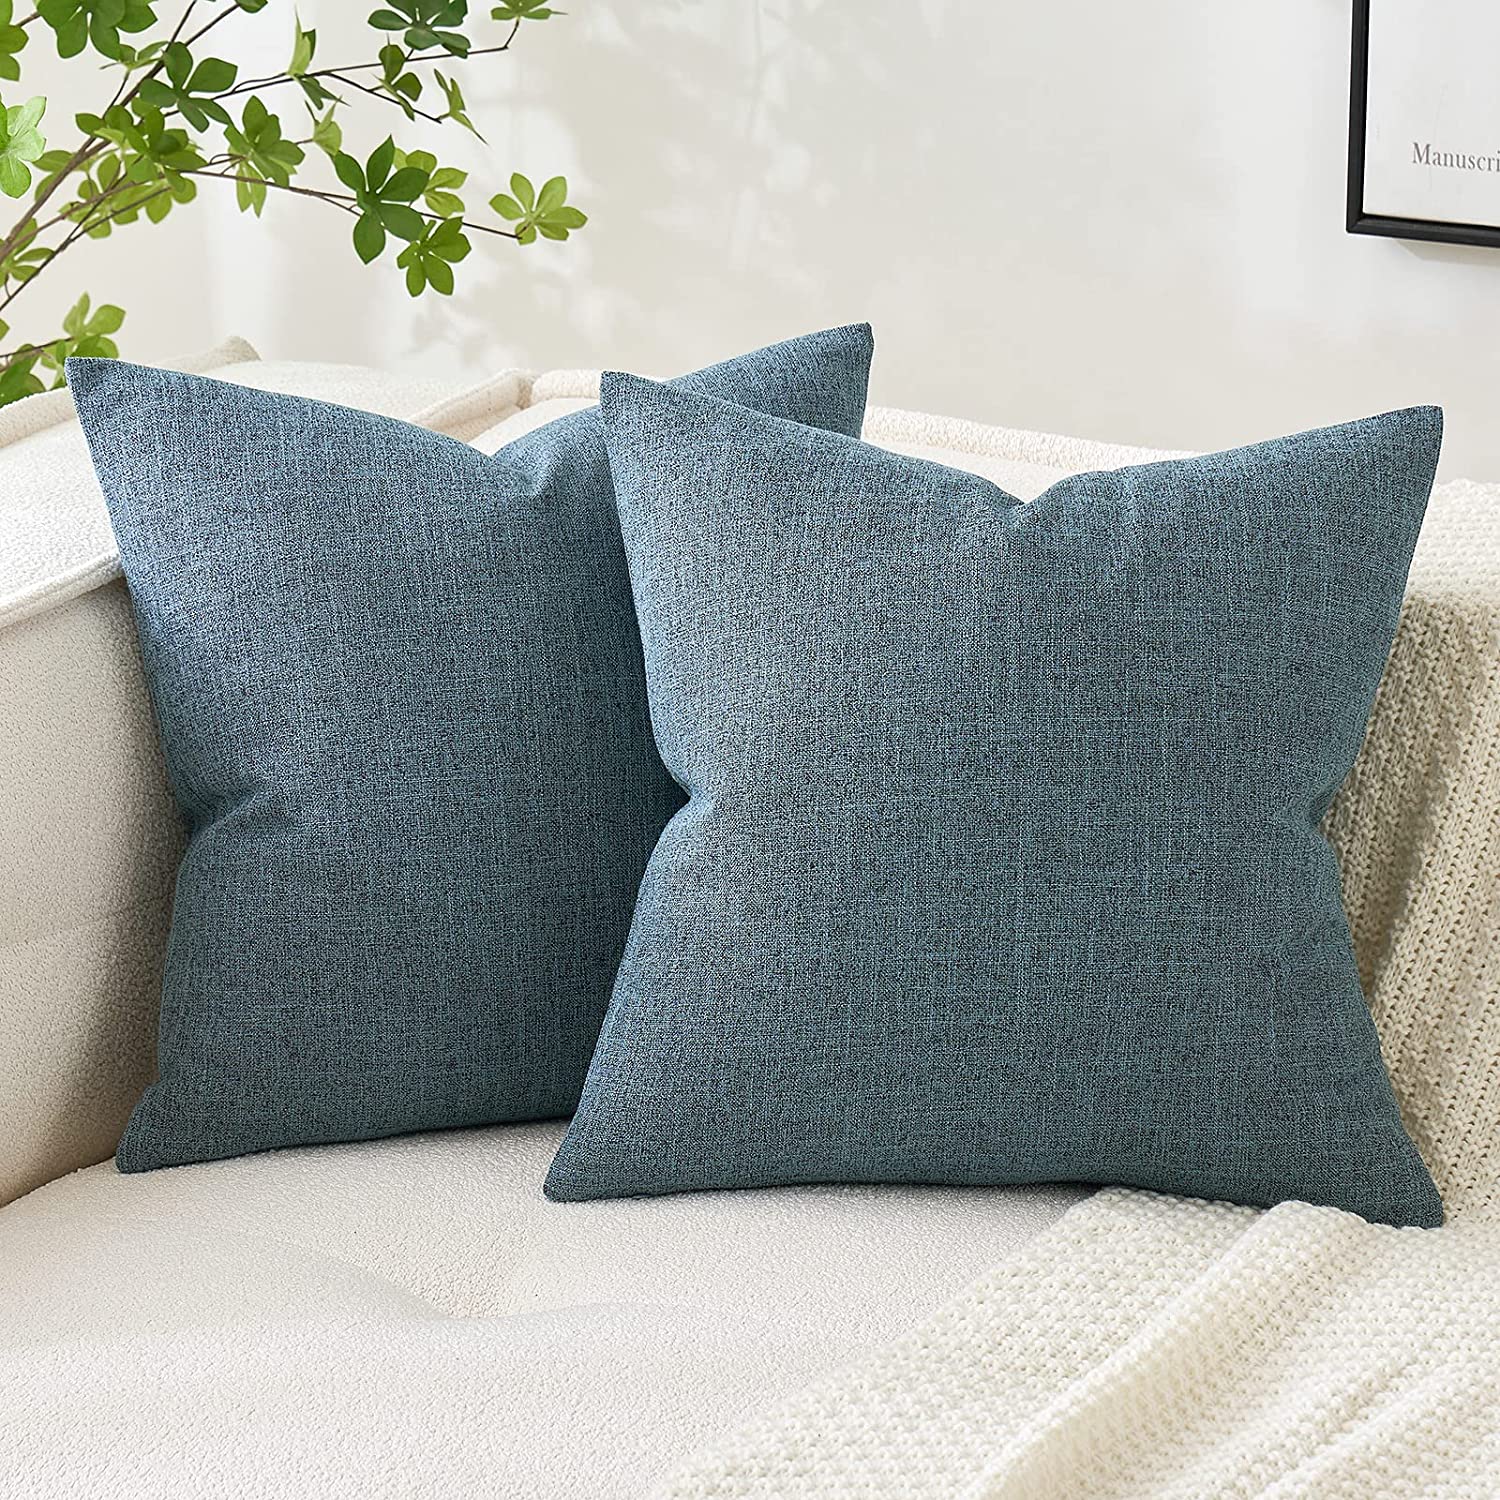 MIULEE Linen Throw Pillow Covers Decorative Cotton Soft Square Cushion